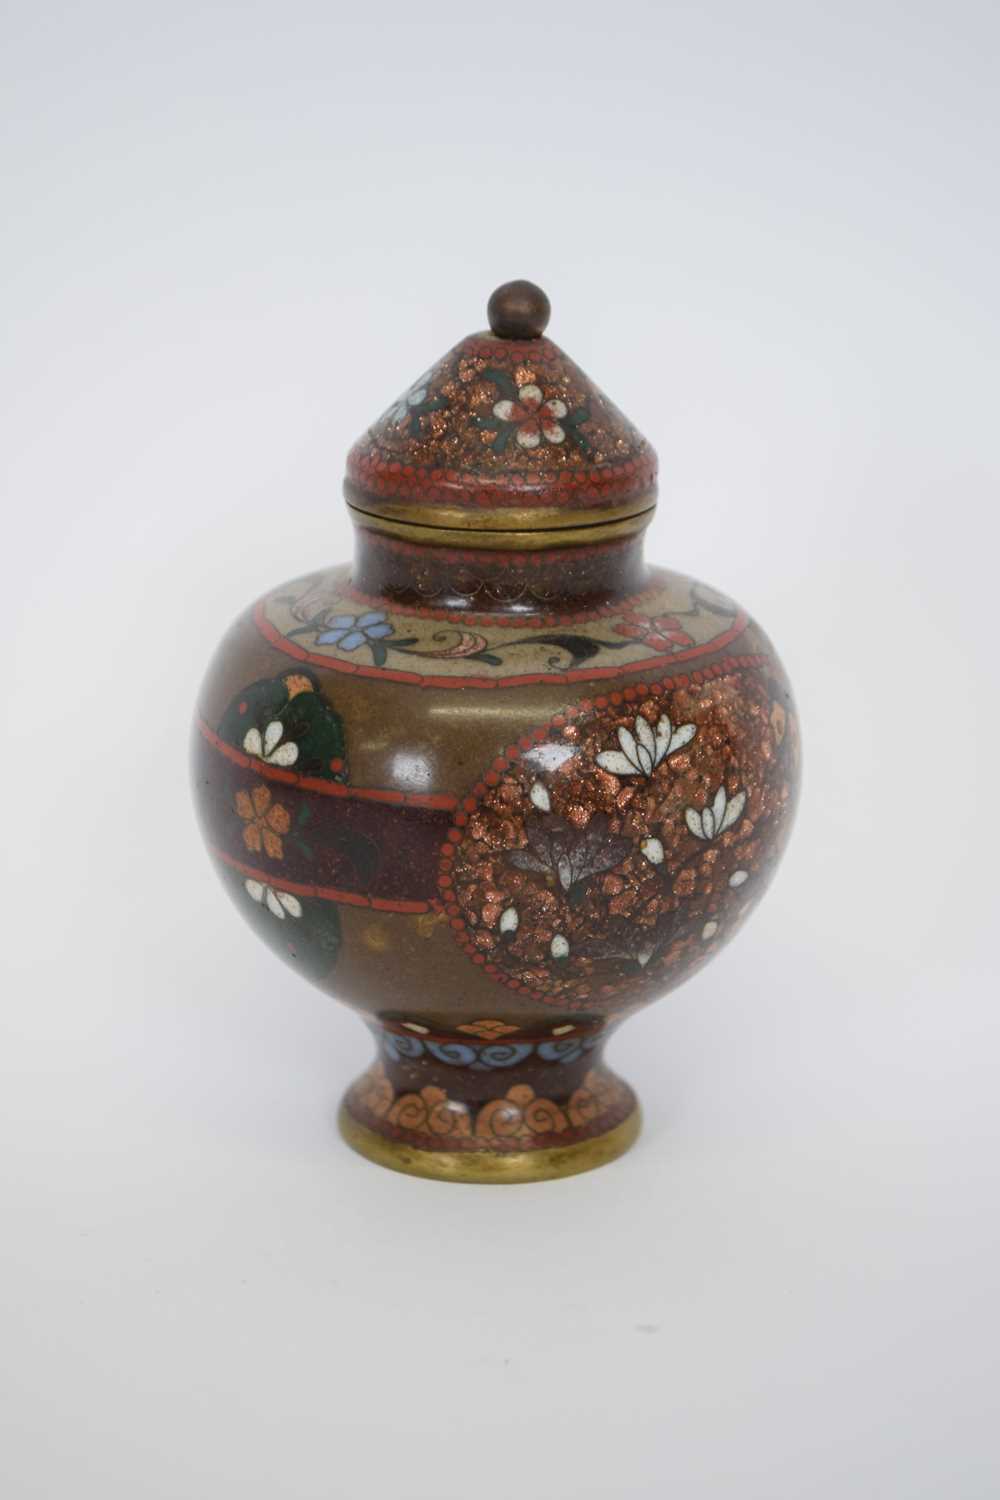 Japanese cloisonne small vase and cover - Image 2 of 4